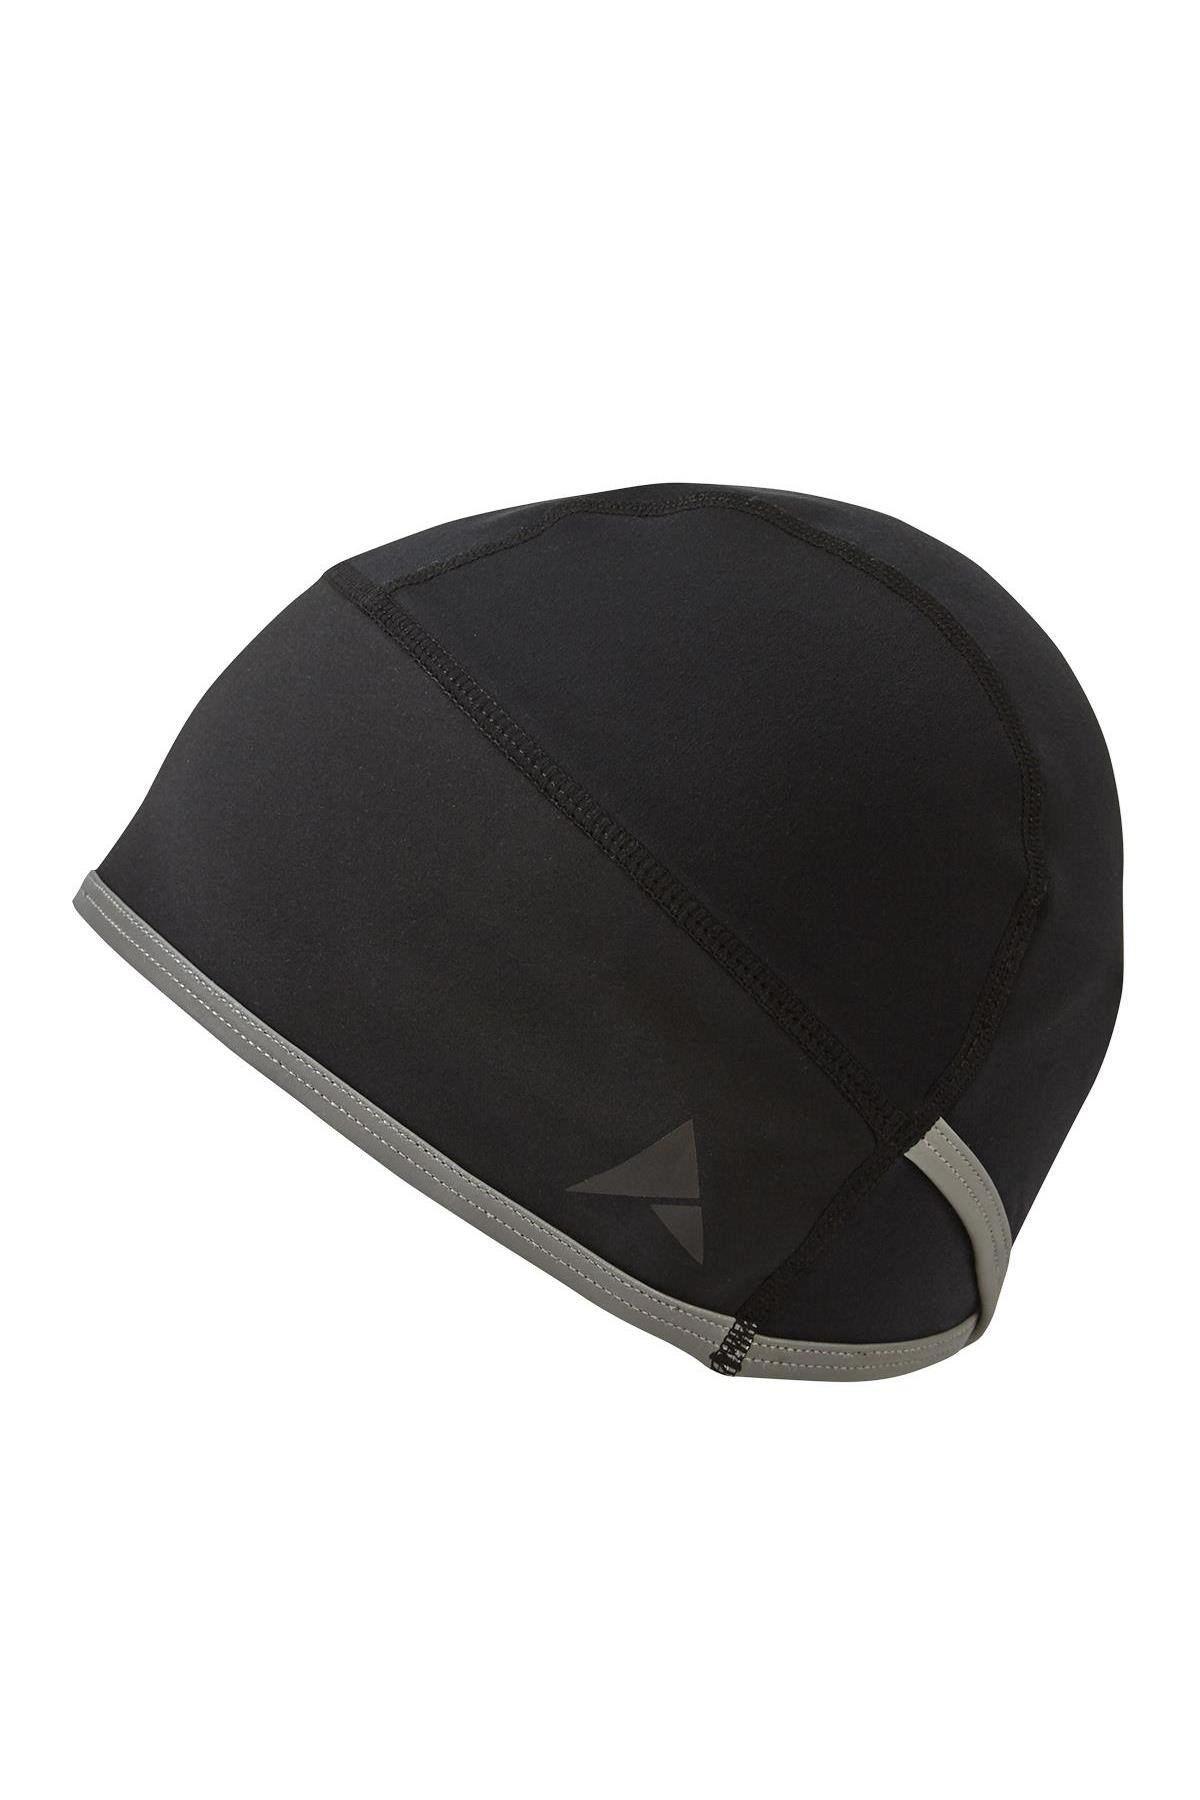 Windproof Cycling Skullcap With Reflective Details -